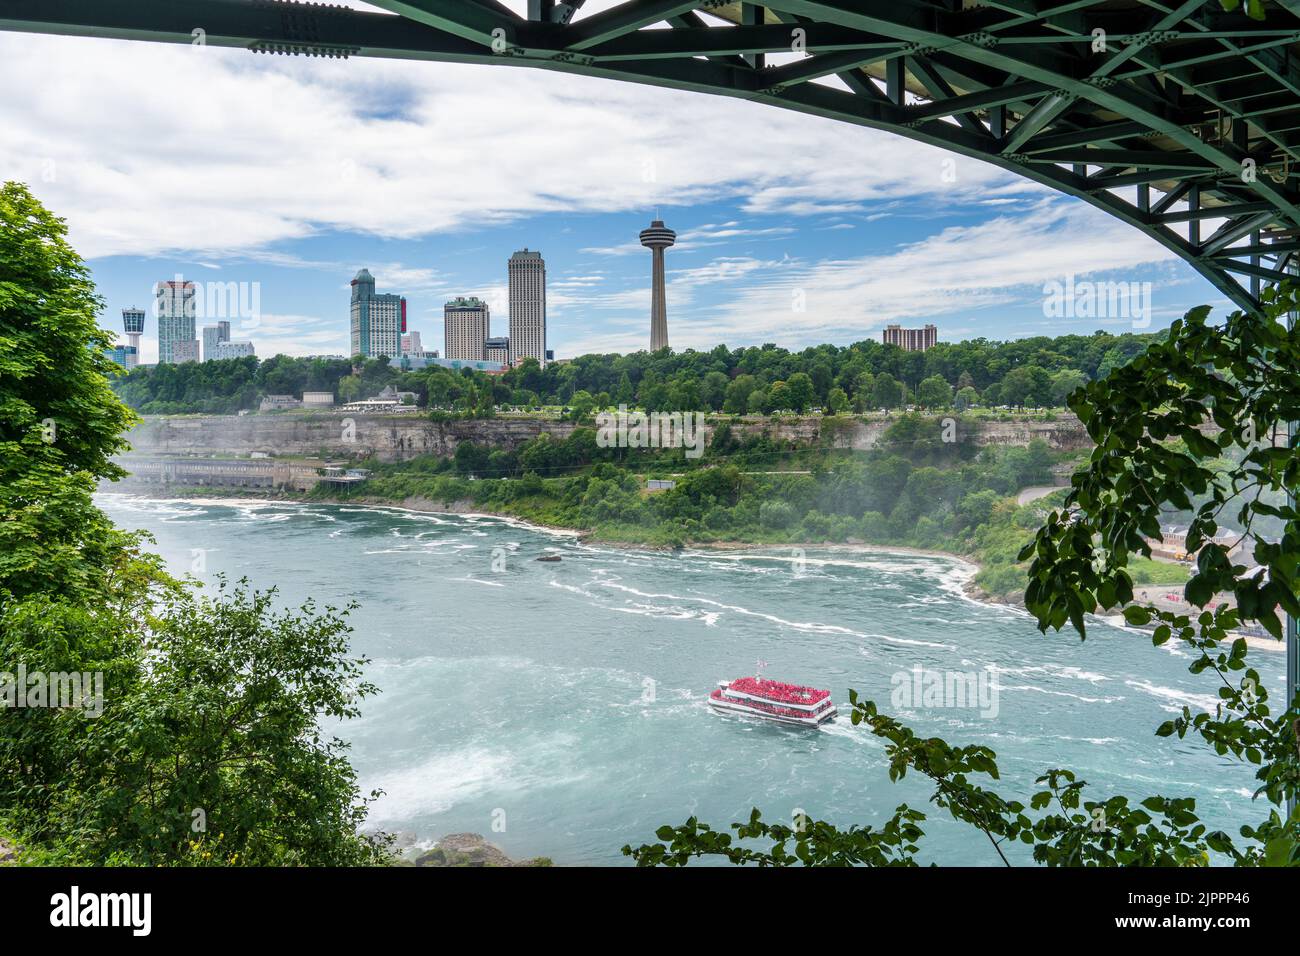 Niagara Falls, NY - July 31, 2022: Skyline of Niagara Falls, Ontario, Canada, with the Hornblower Niagara tour boat on the river below, framed by the Stock Photo